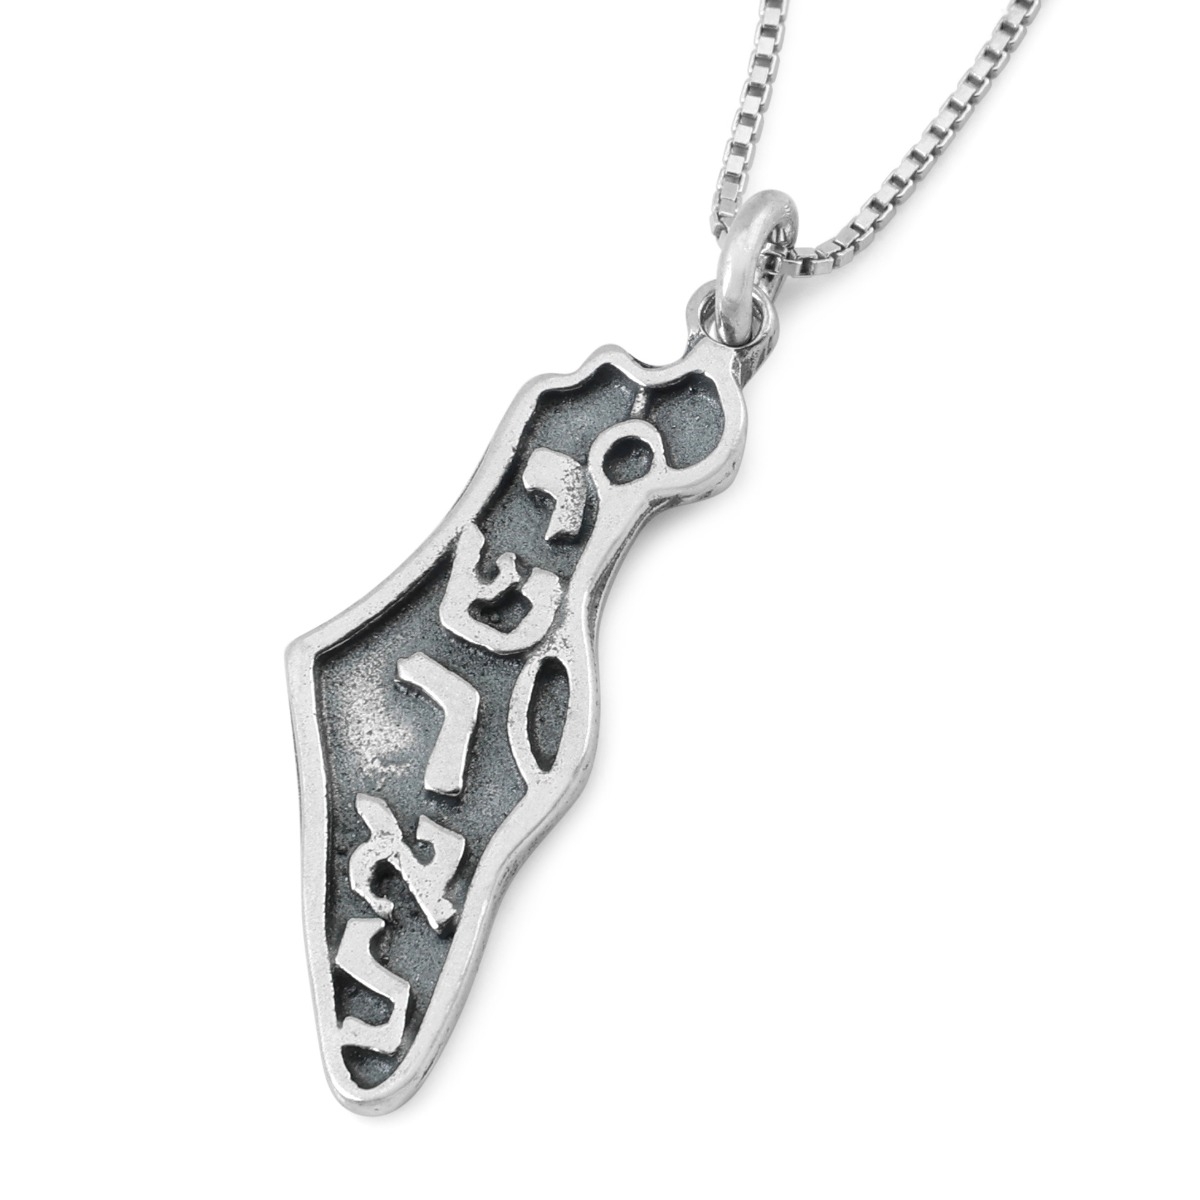 Sterling Silver Map of Israel Necklace with Yisrael Inscription - 1